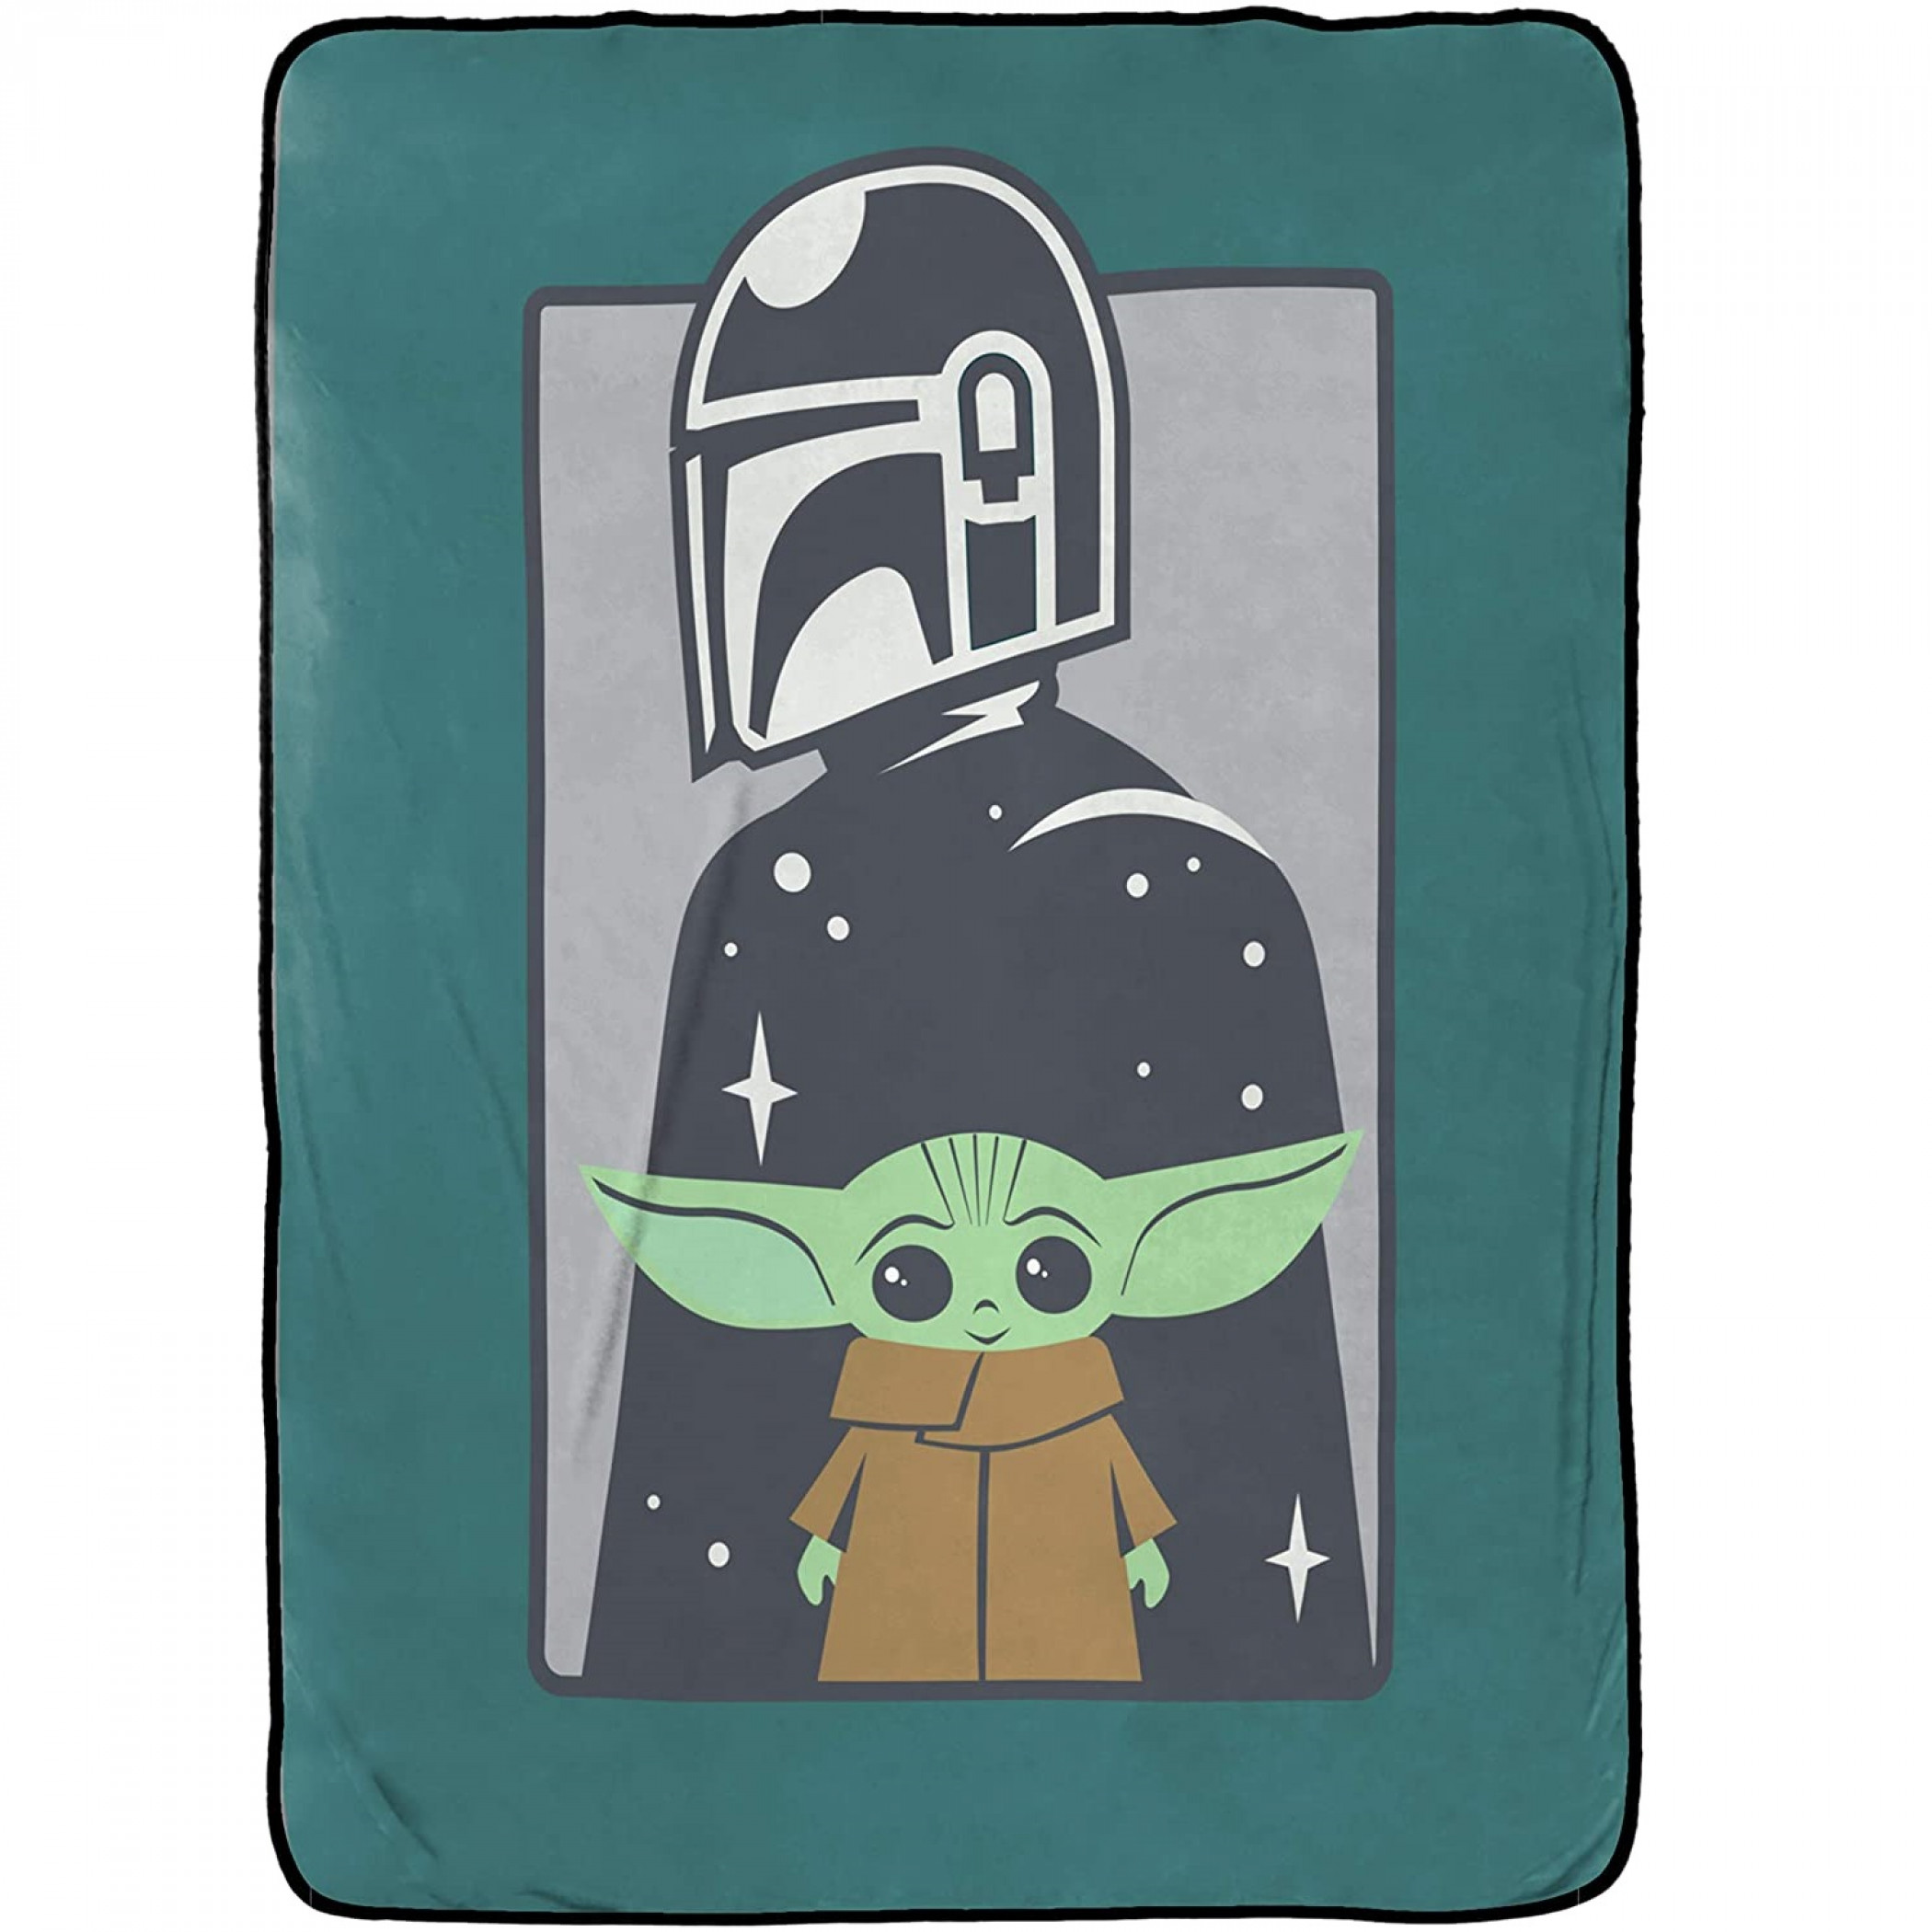 Star Wars The Mandalorian The Curious Child Throw Blanket